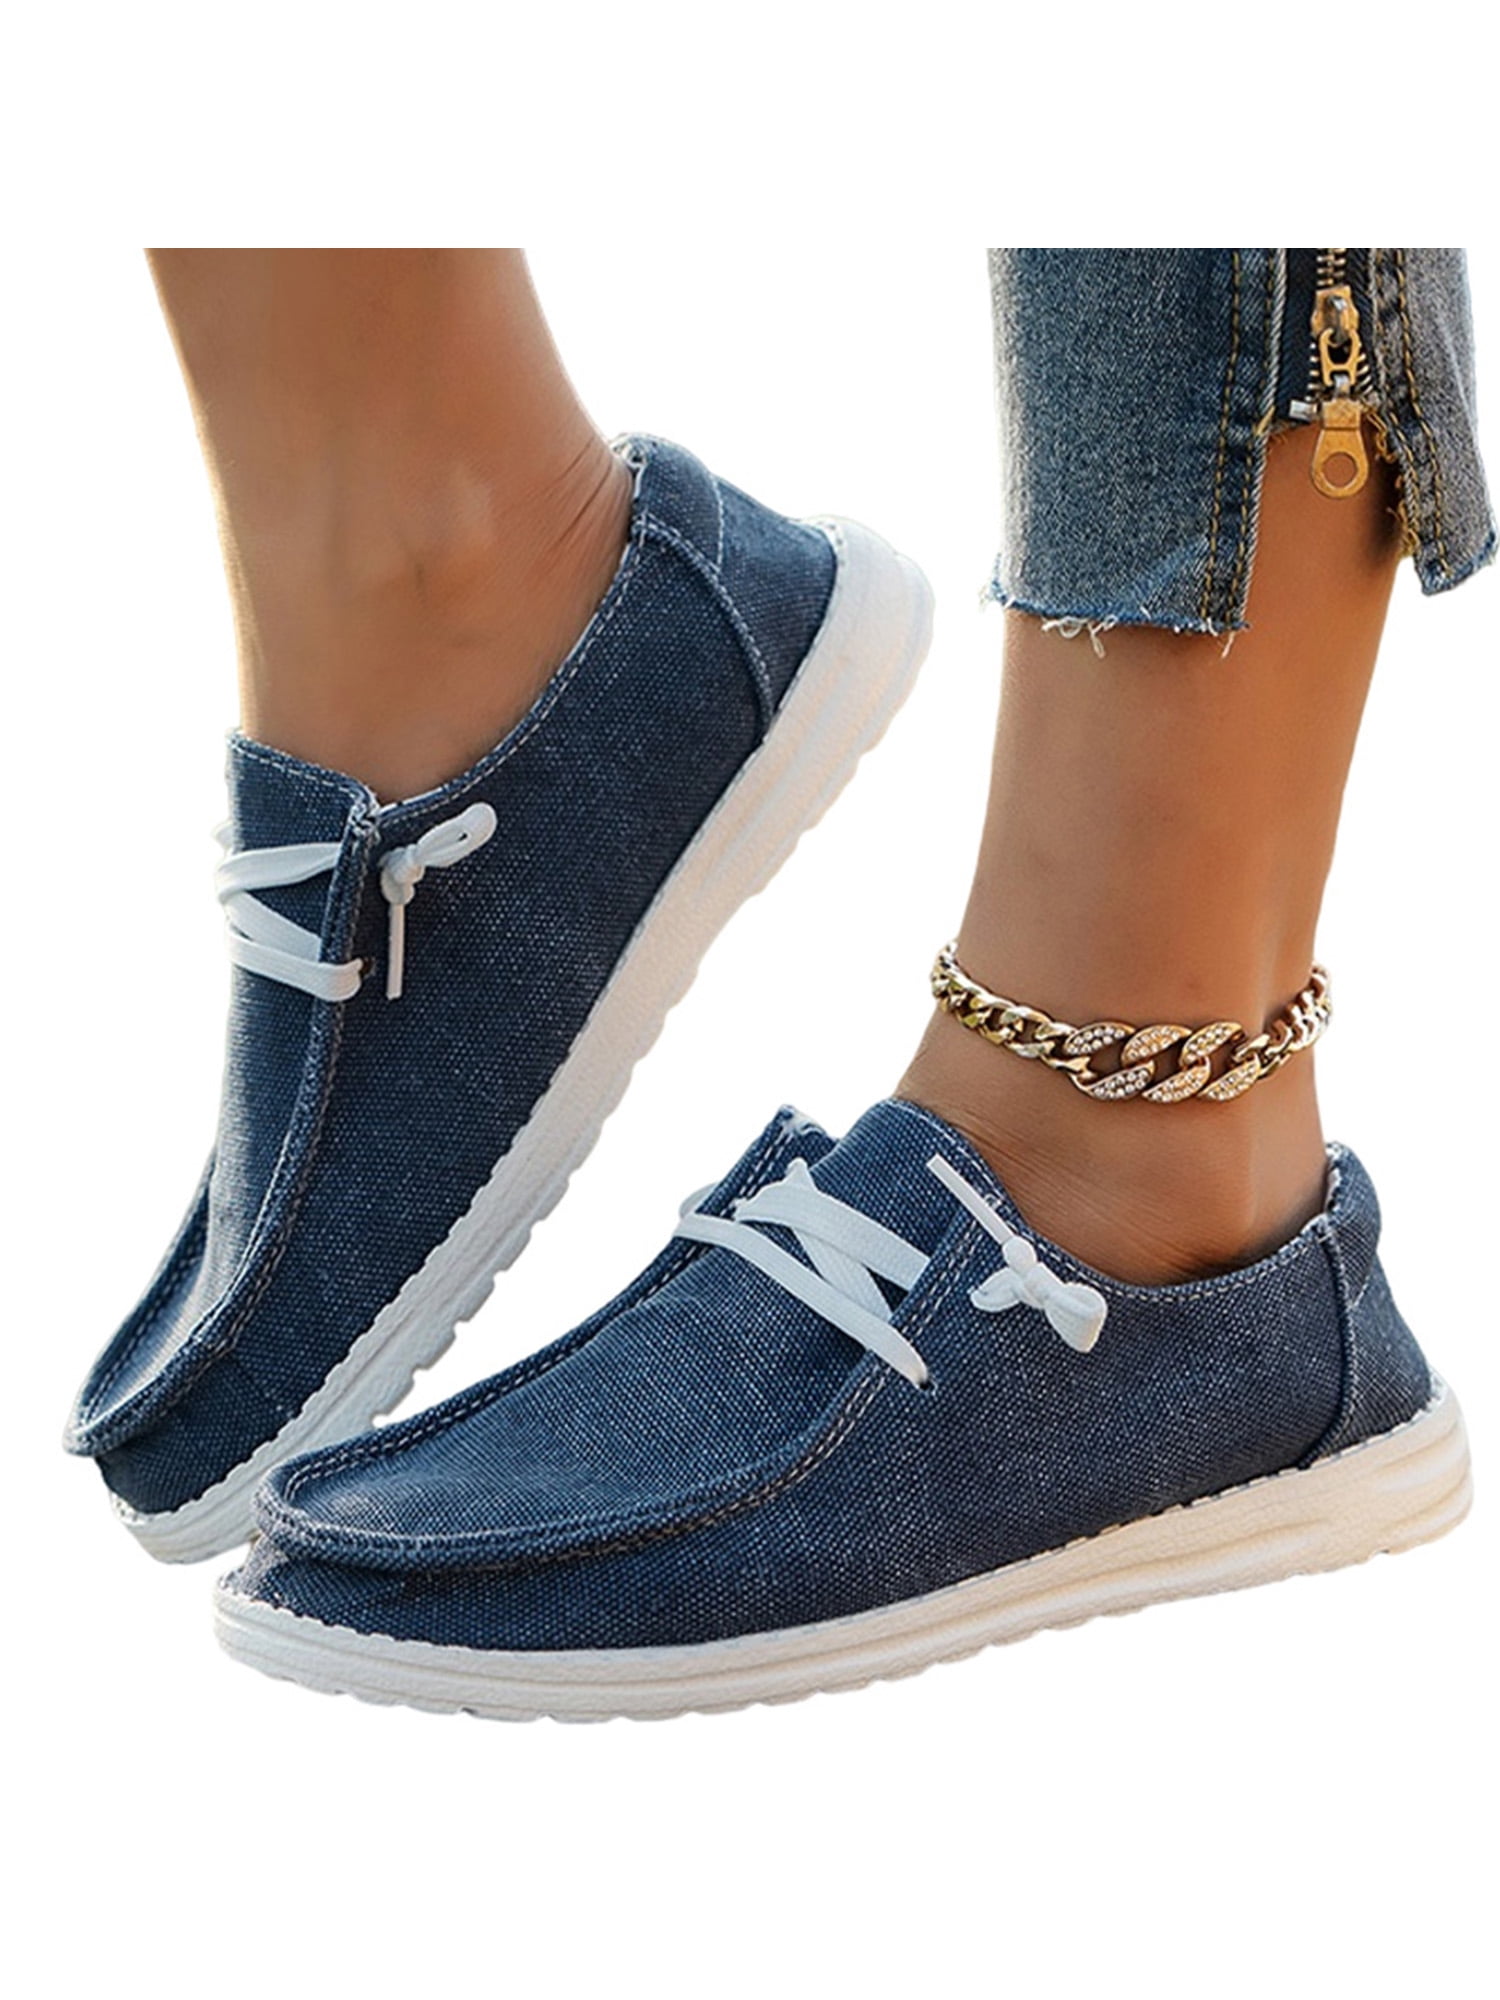 Women Slip On Loafers Casual Flat Shoes Walking Sneakers Breathable Shoe Comfort 